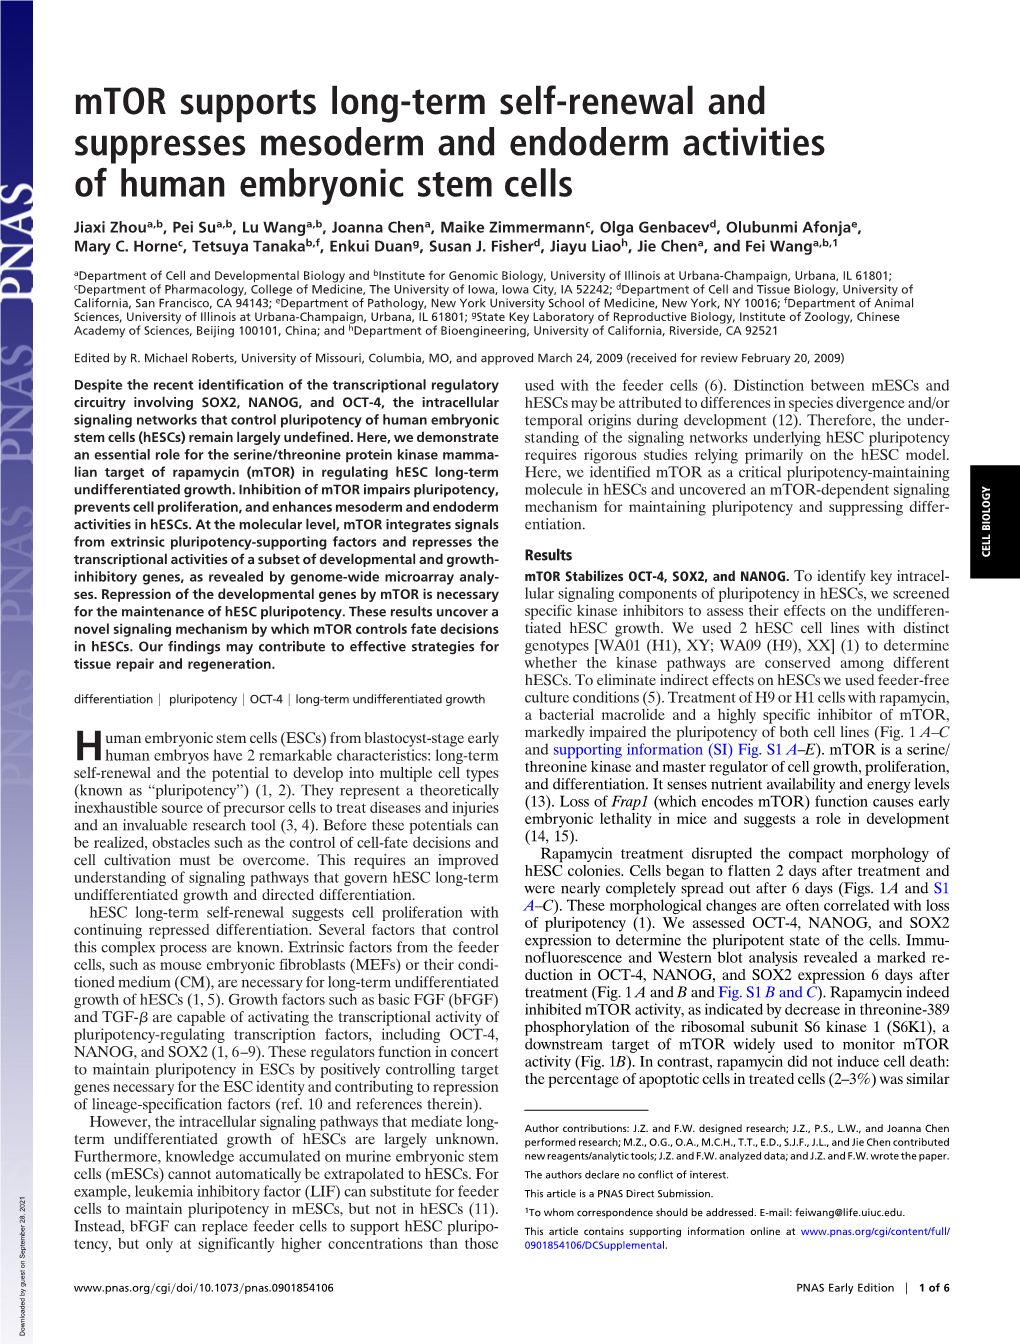 Mtor Supports Long-Term Self-Renewal and Suppresses Mesoderm and Endoderm Activities of Human Embryonic Stem Cells